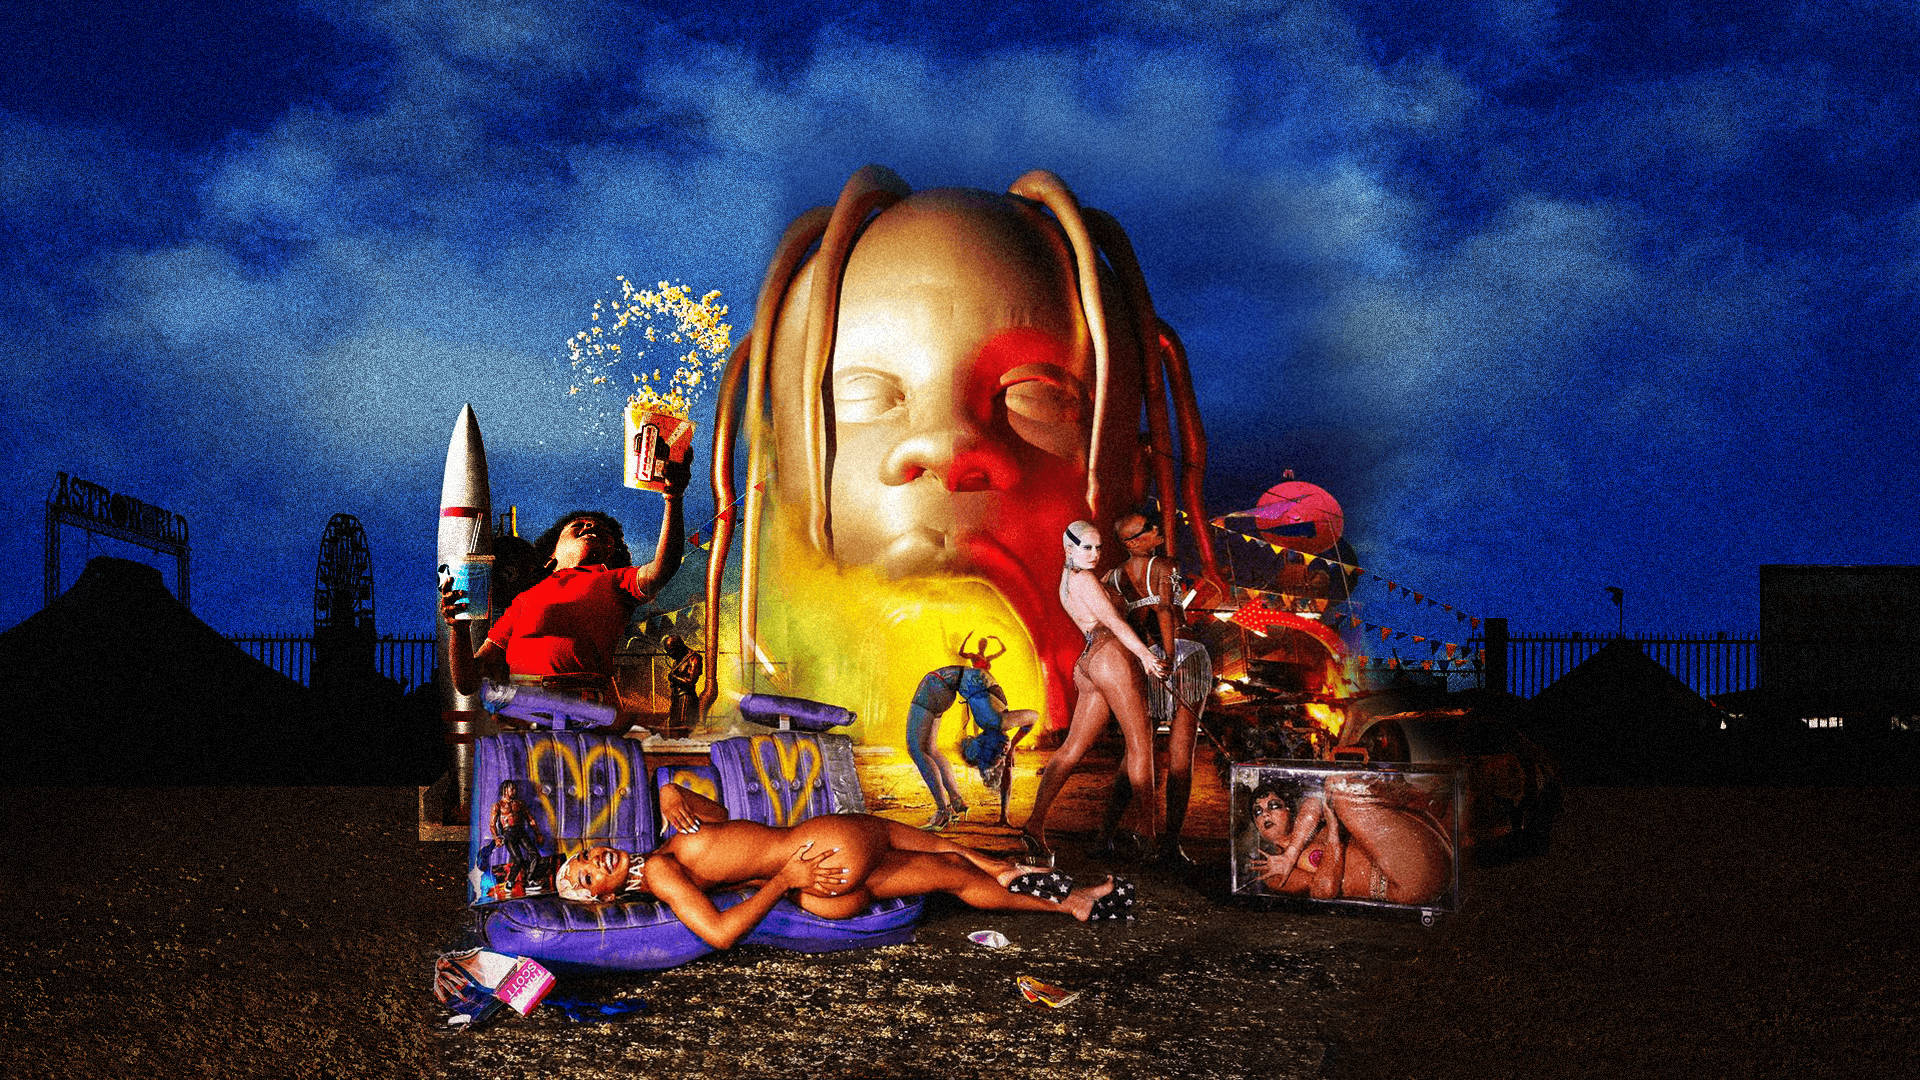 Come experience the world of Astroworld. Wallpaper